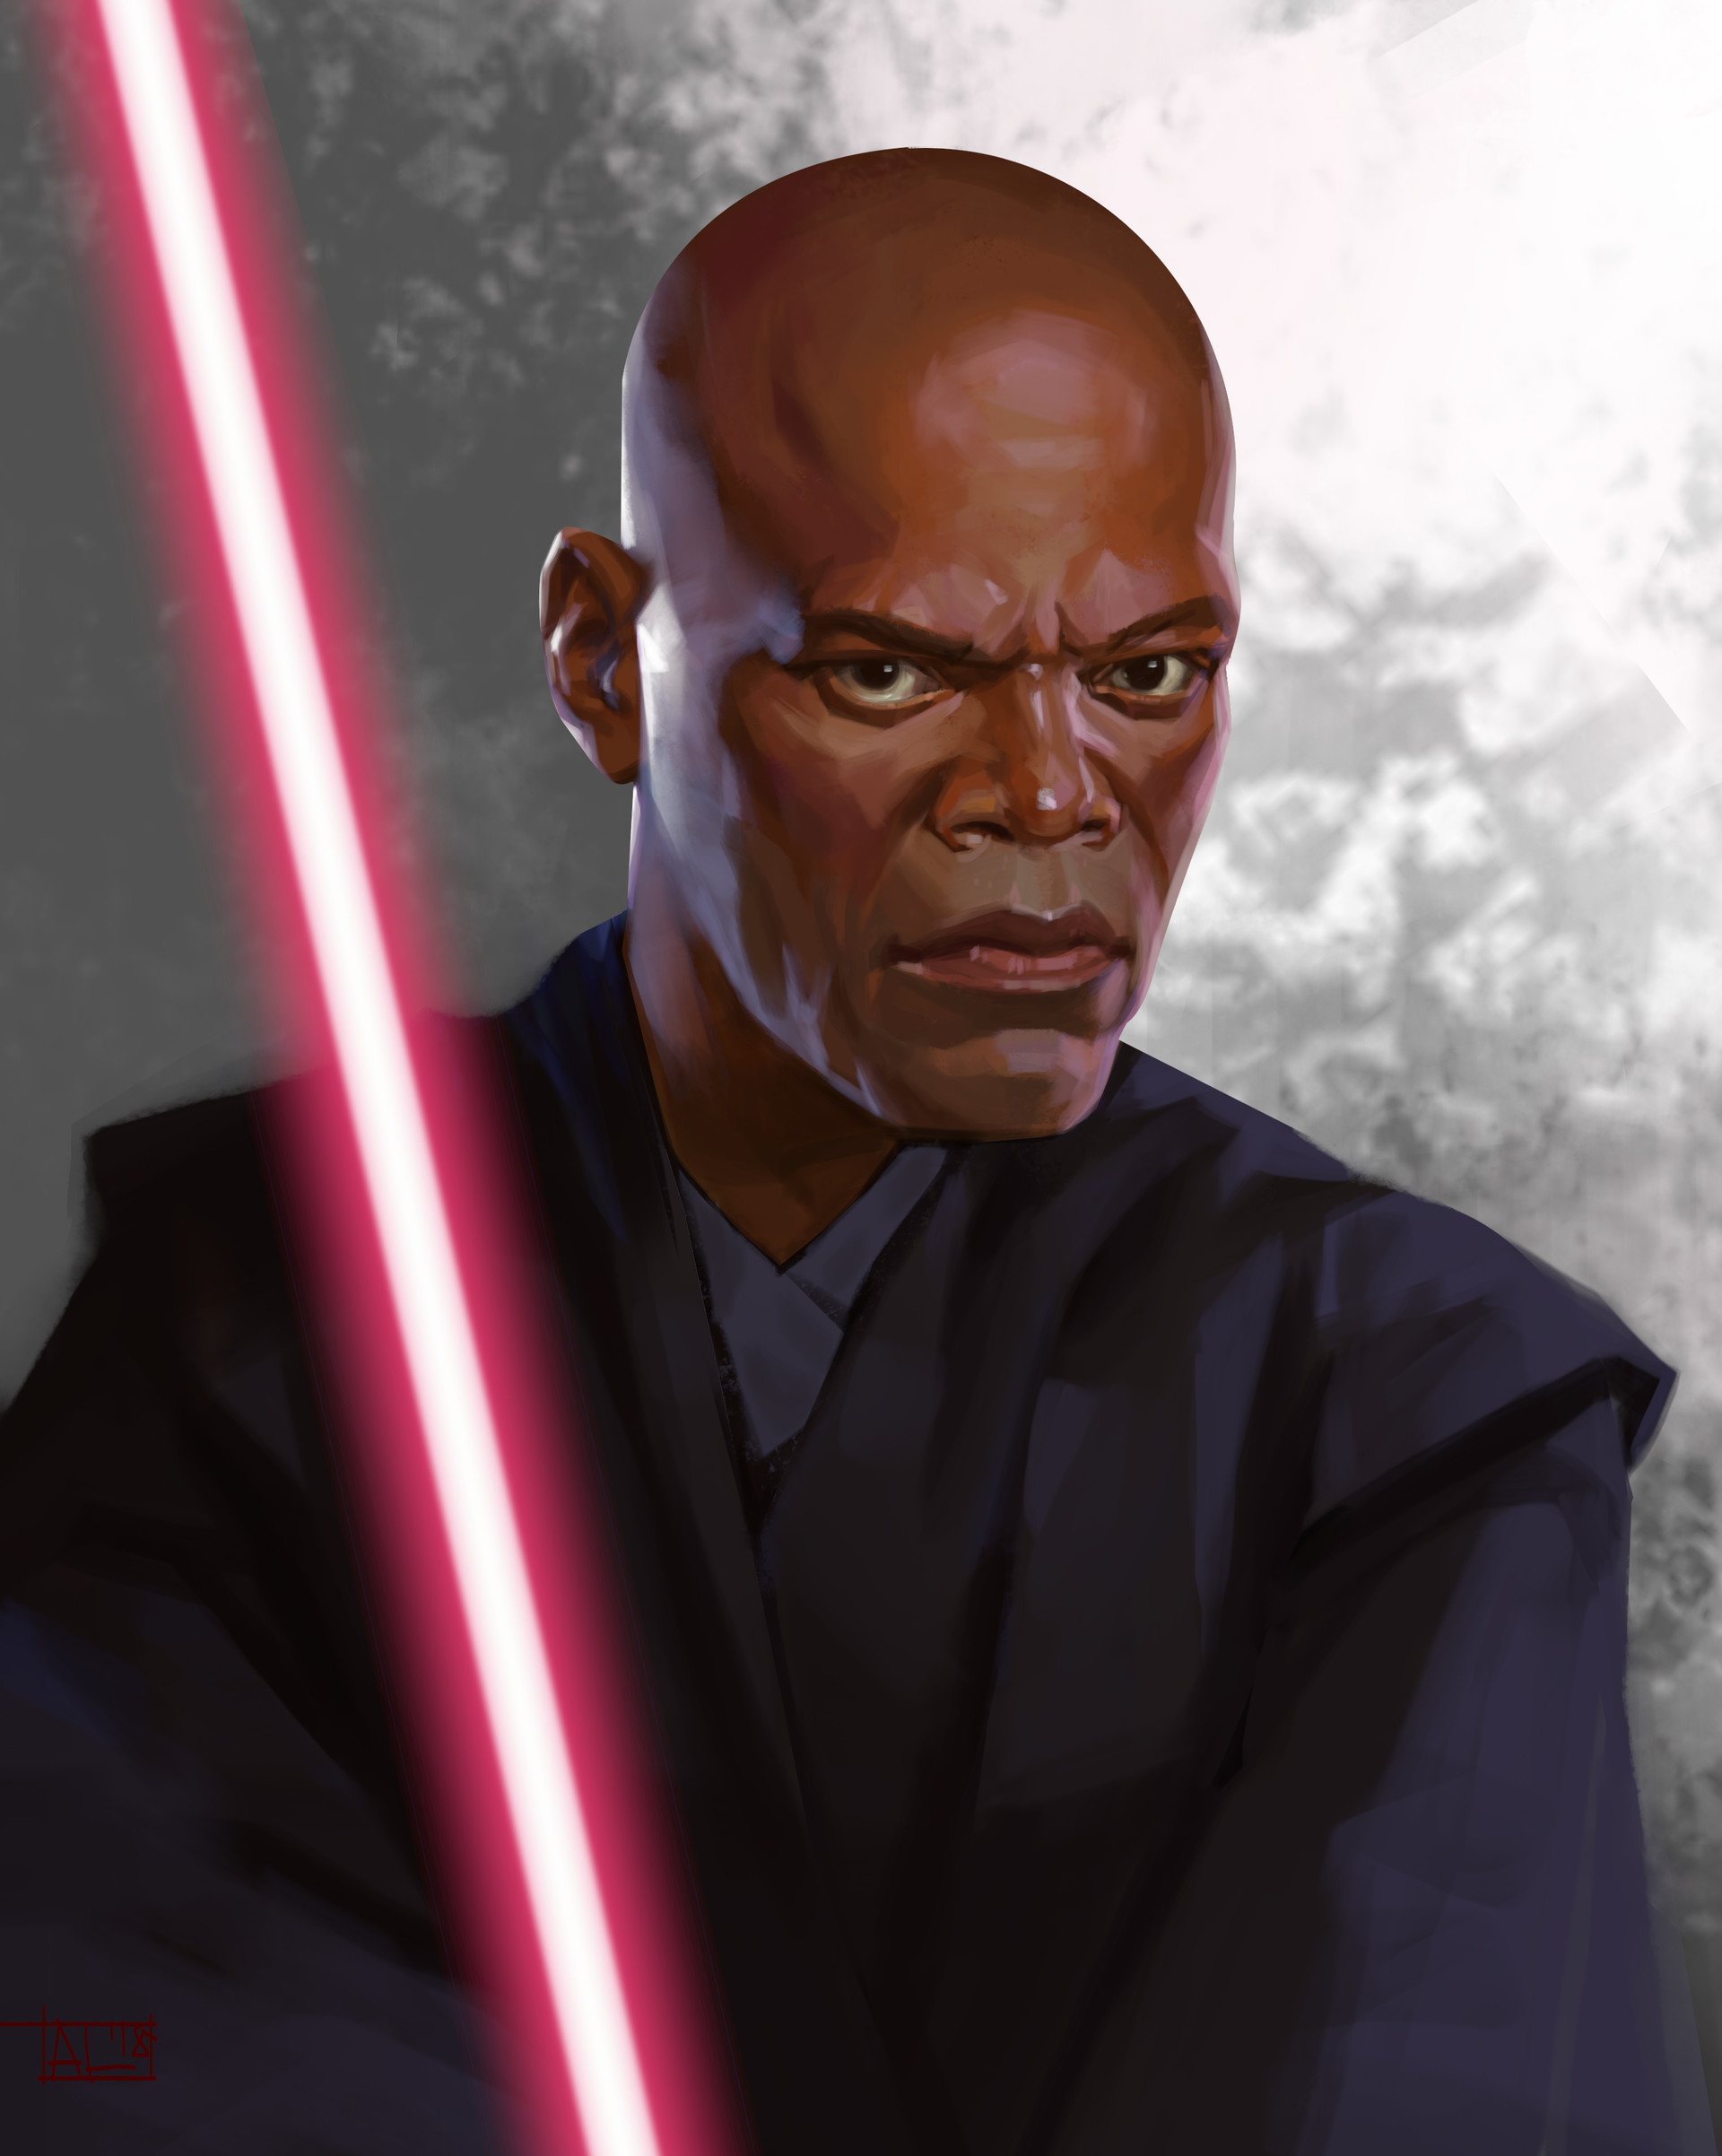 This face study suddenly has grown into Mace Windu portrait. 